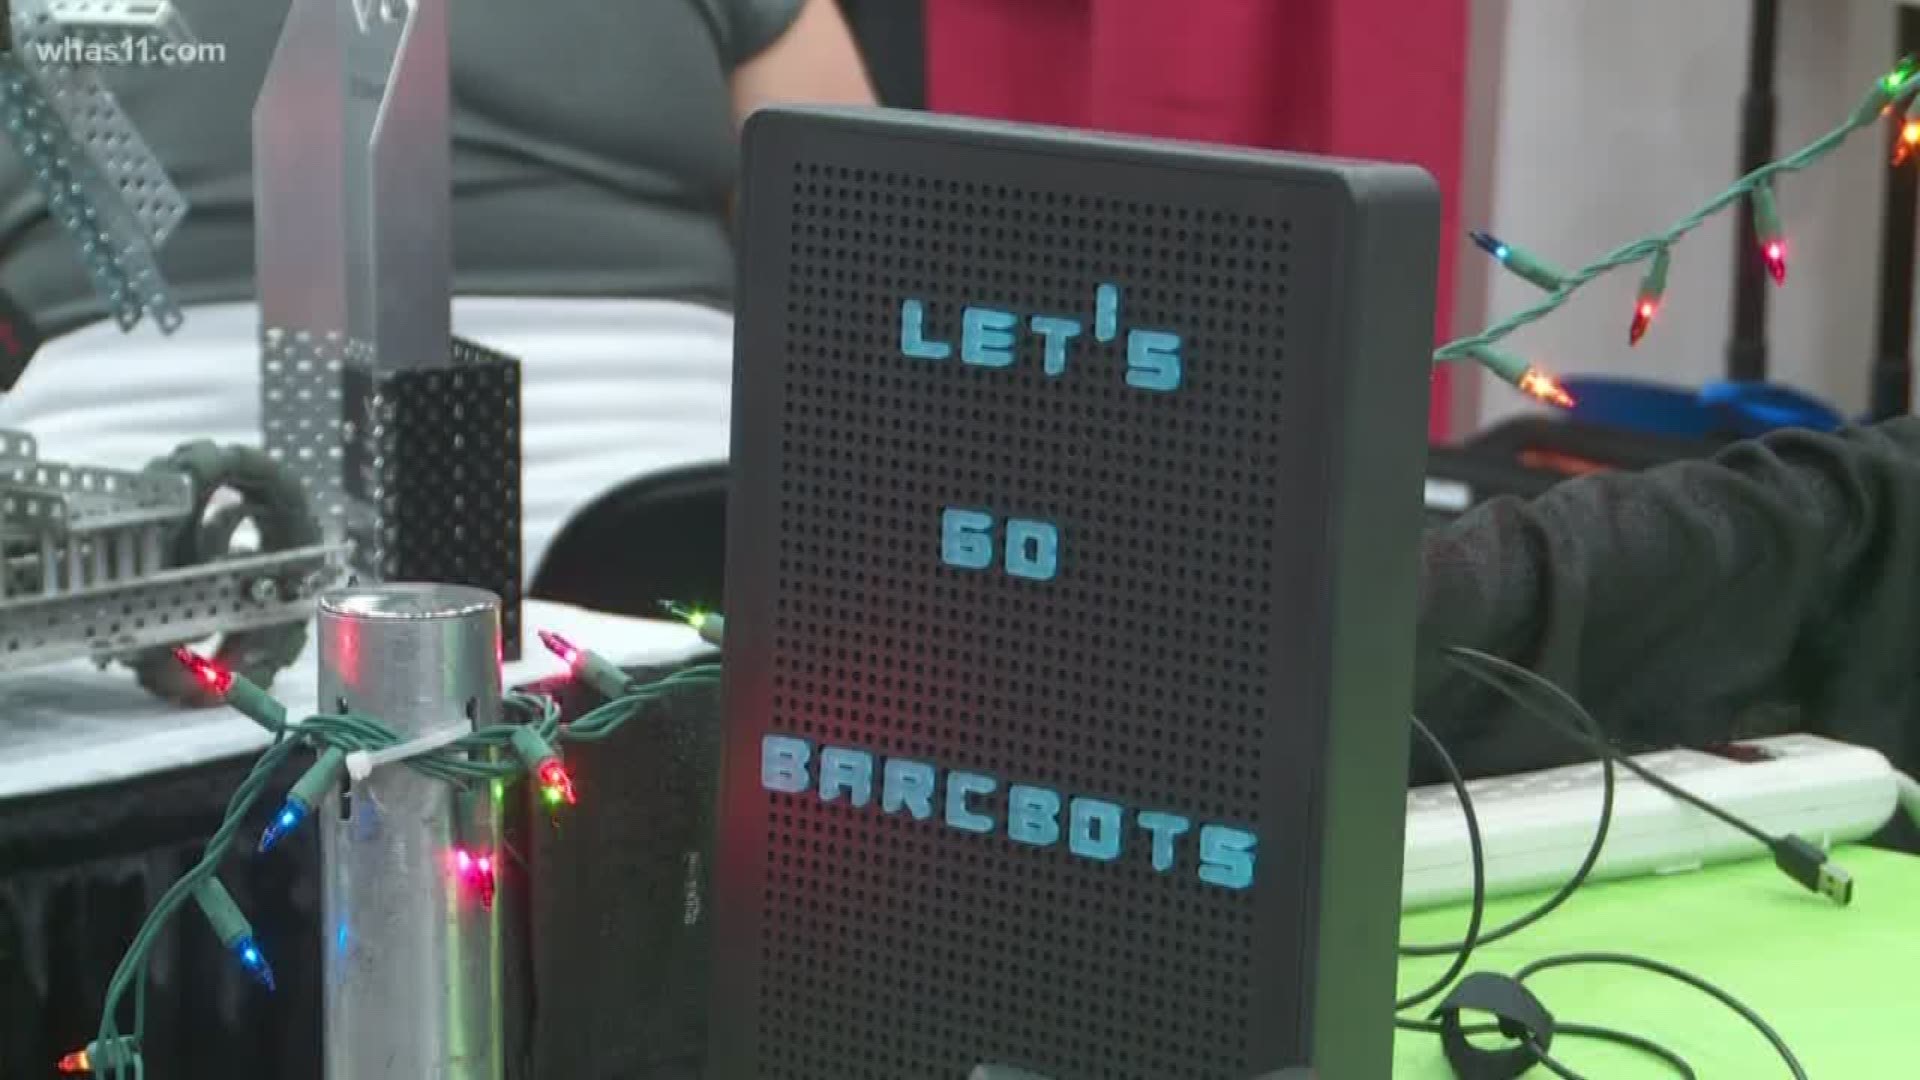 Miles away from their home base in California, one robotics team landed in Louisville for the World Championships of Robotics without their robot.